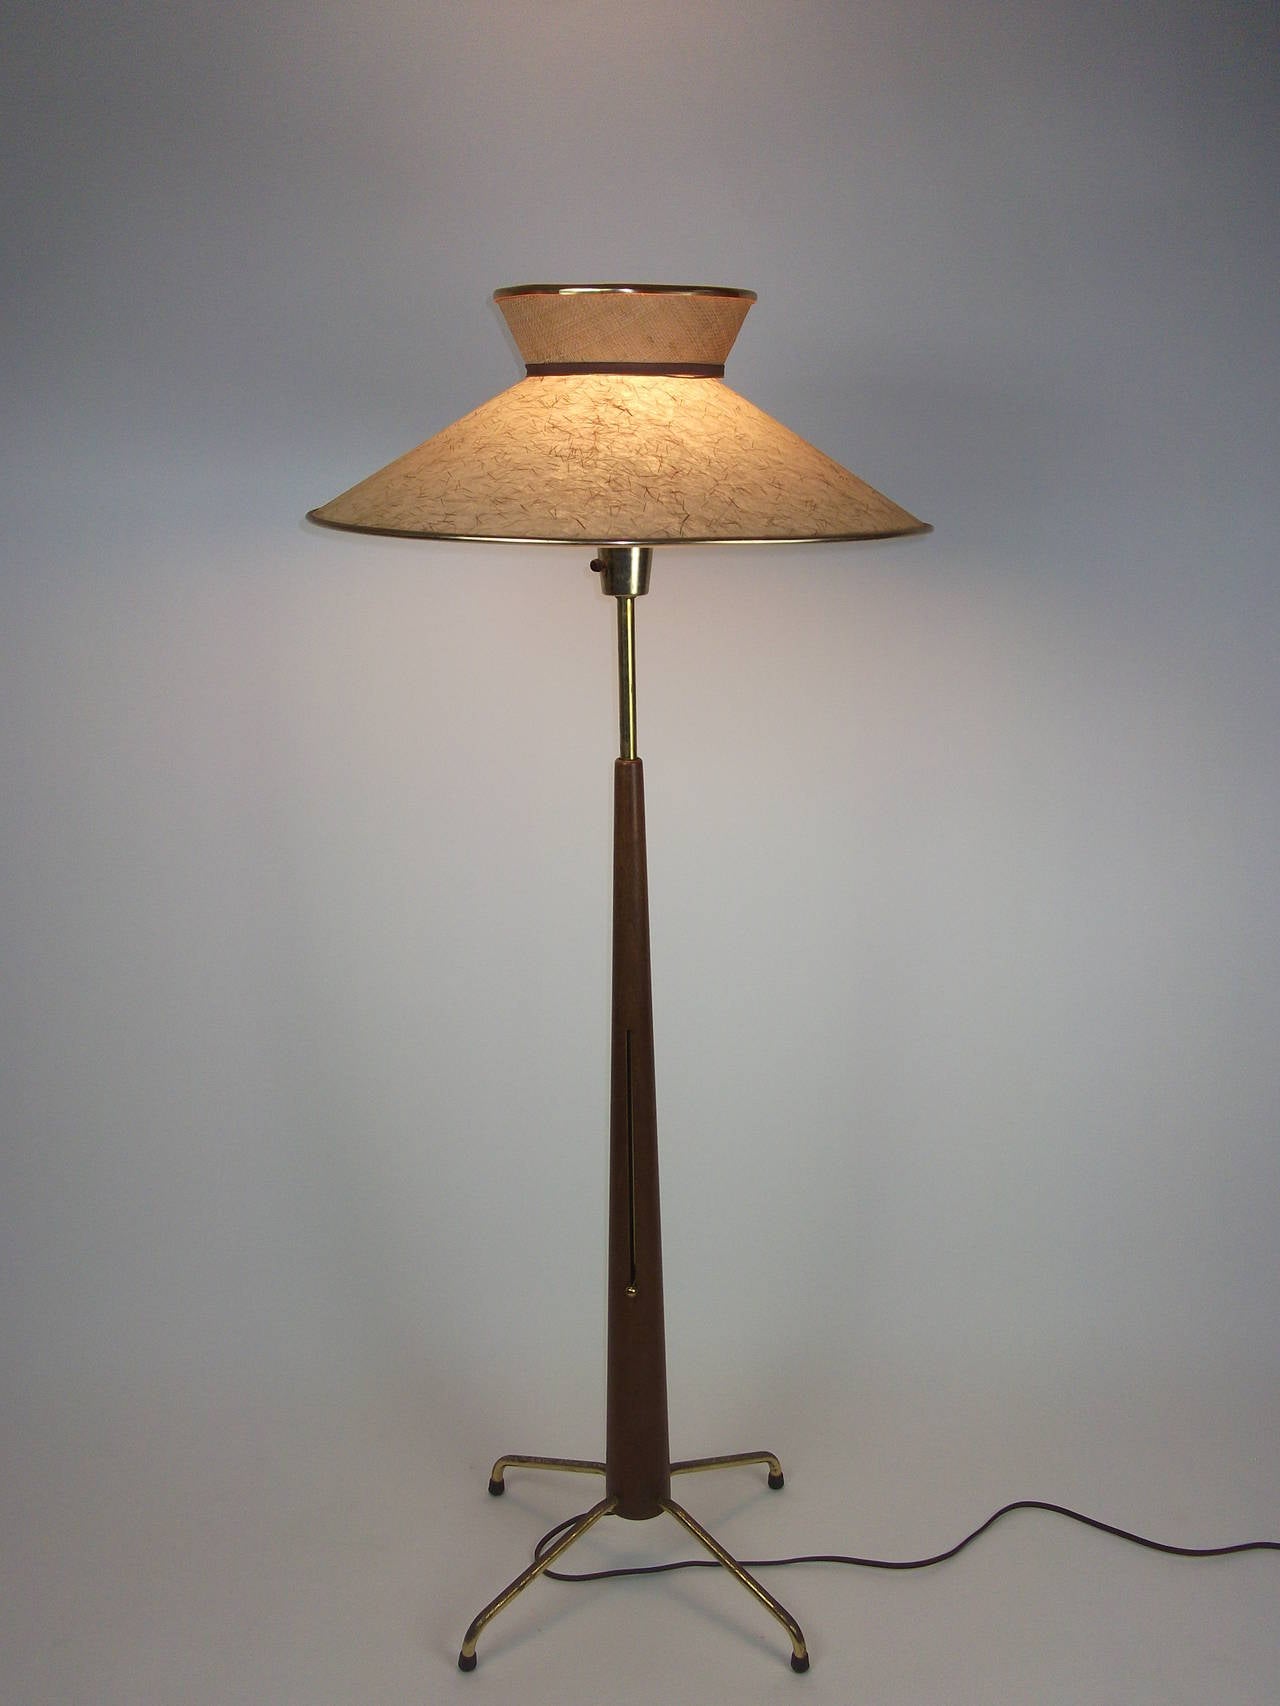 1950s Adjustable Floor Lamp Attributed to Gerald Thurston for Lightolier For Sale 2